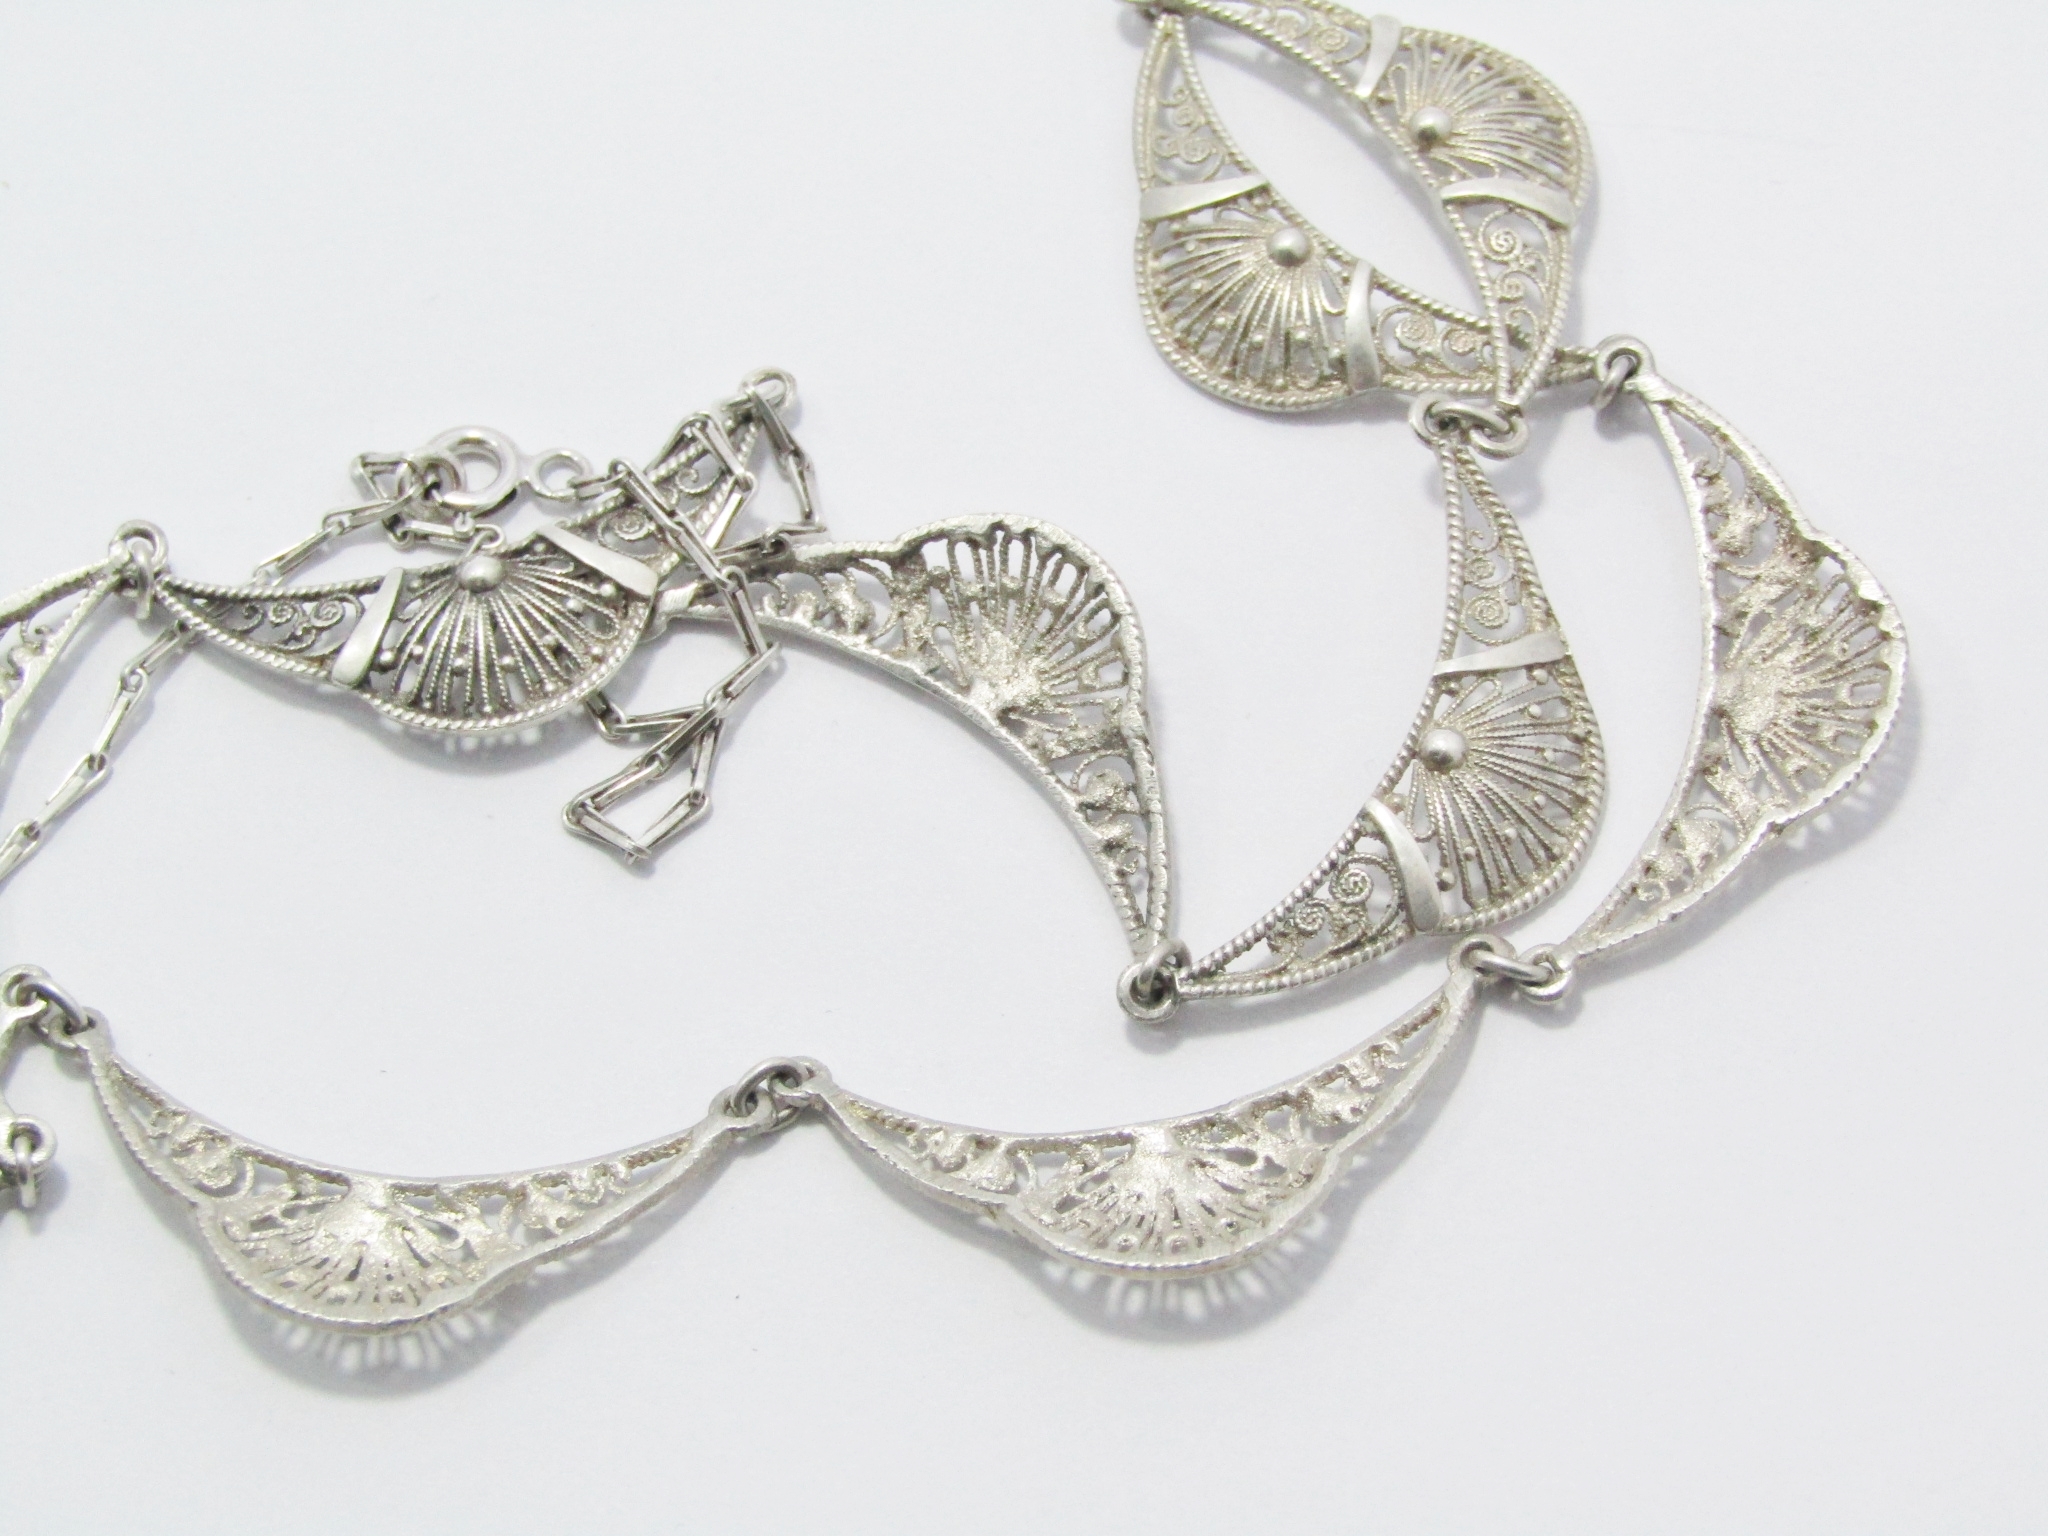 A Gorgeous Vintage Design Necklace in Sterling Silver.